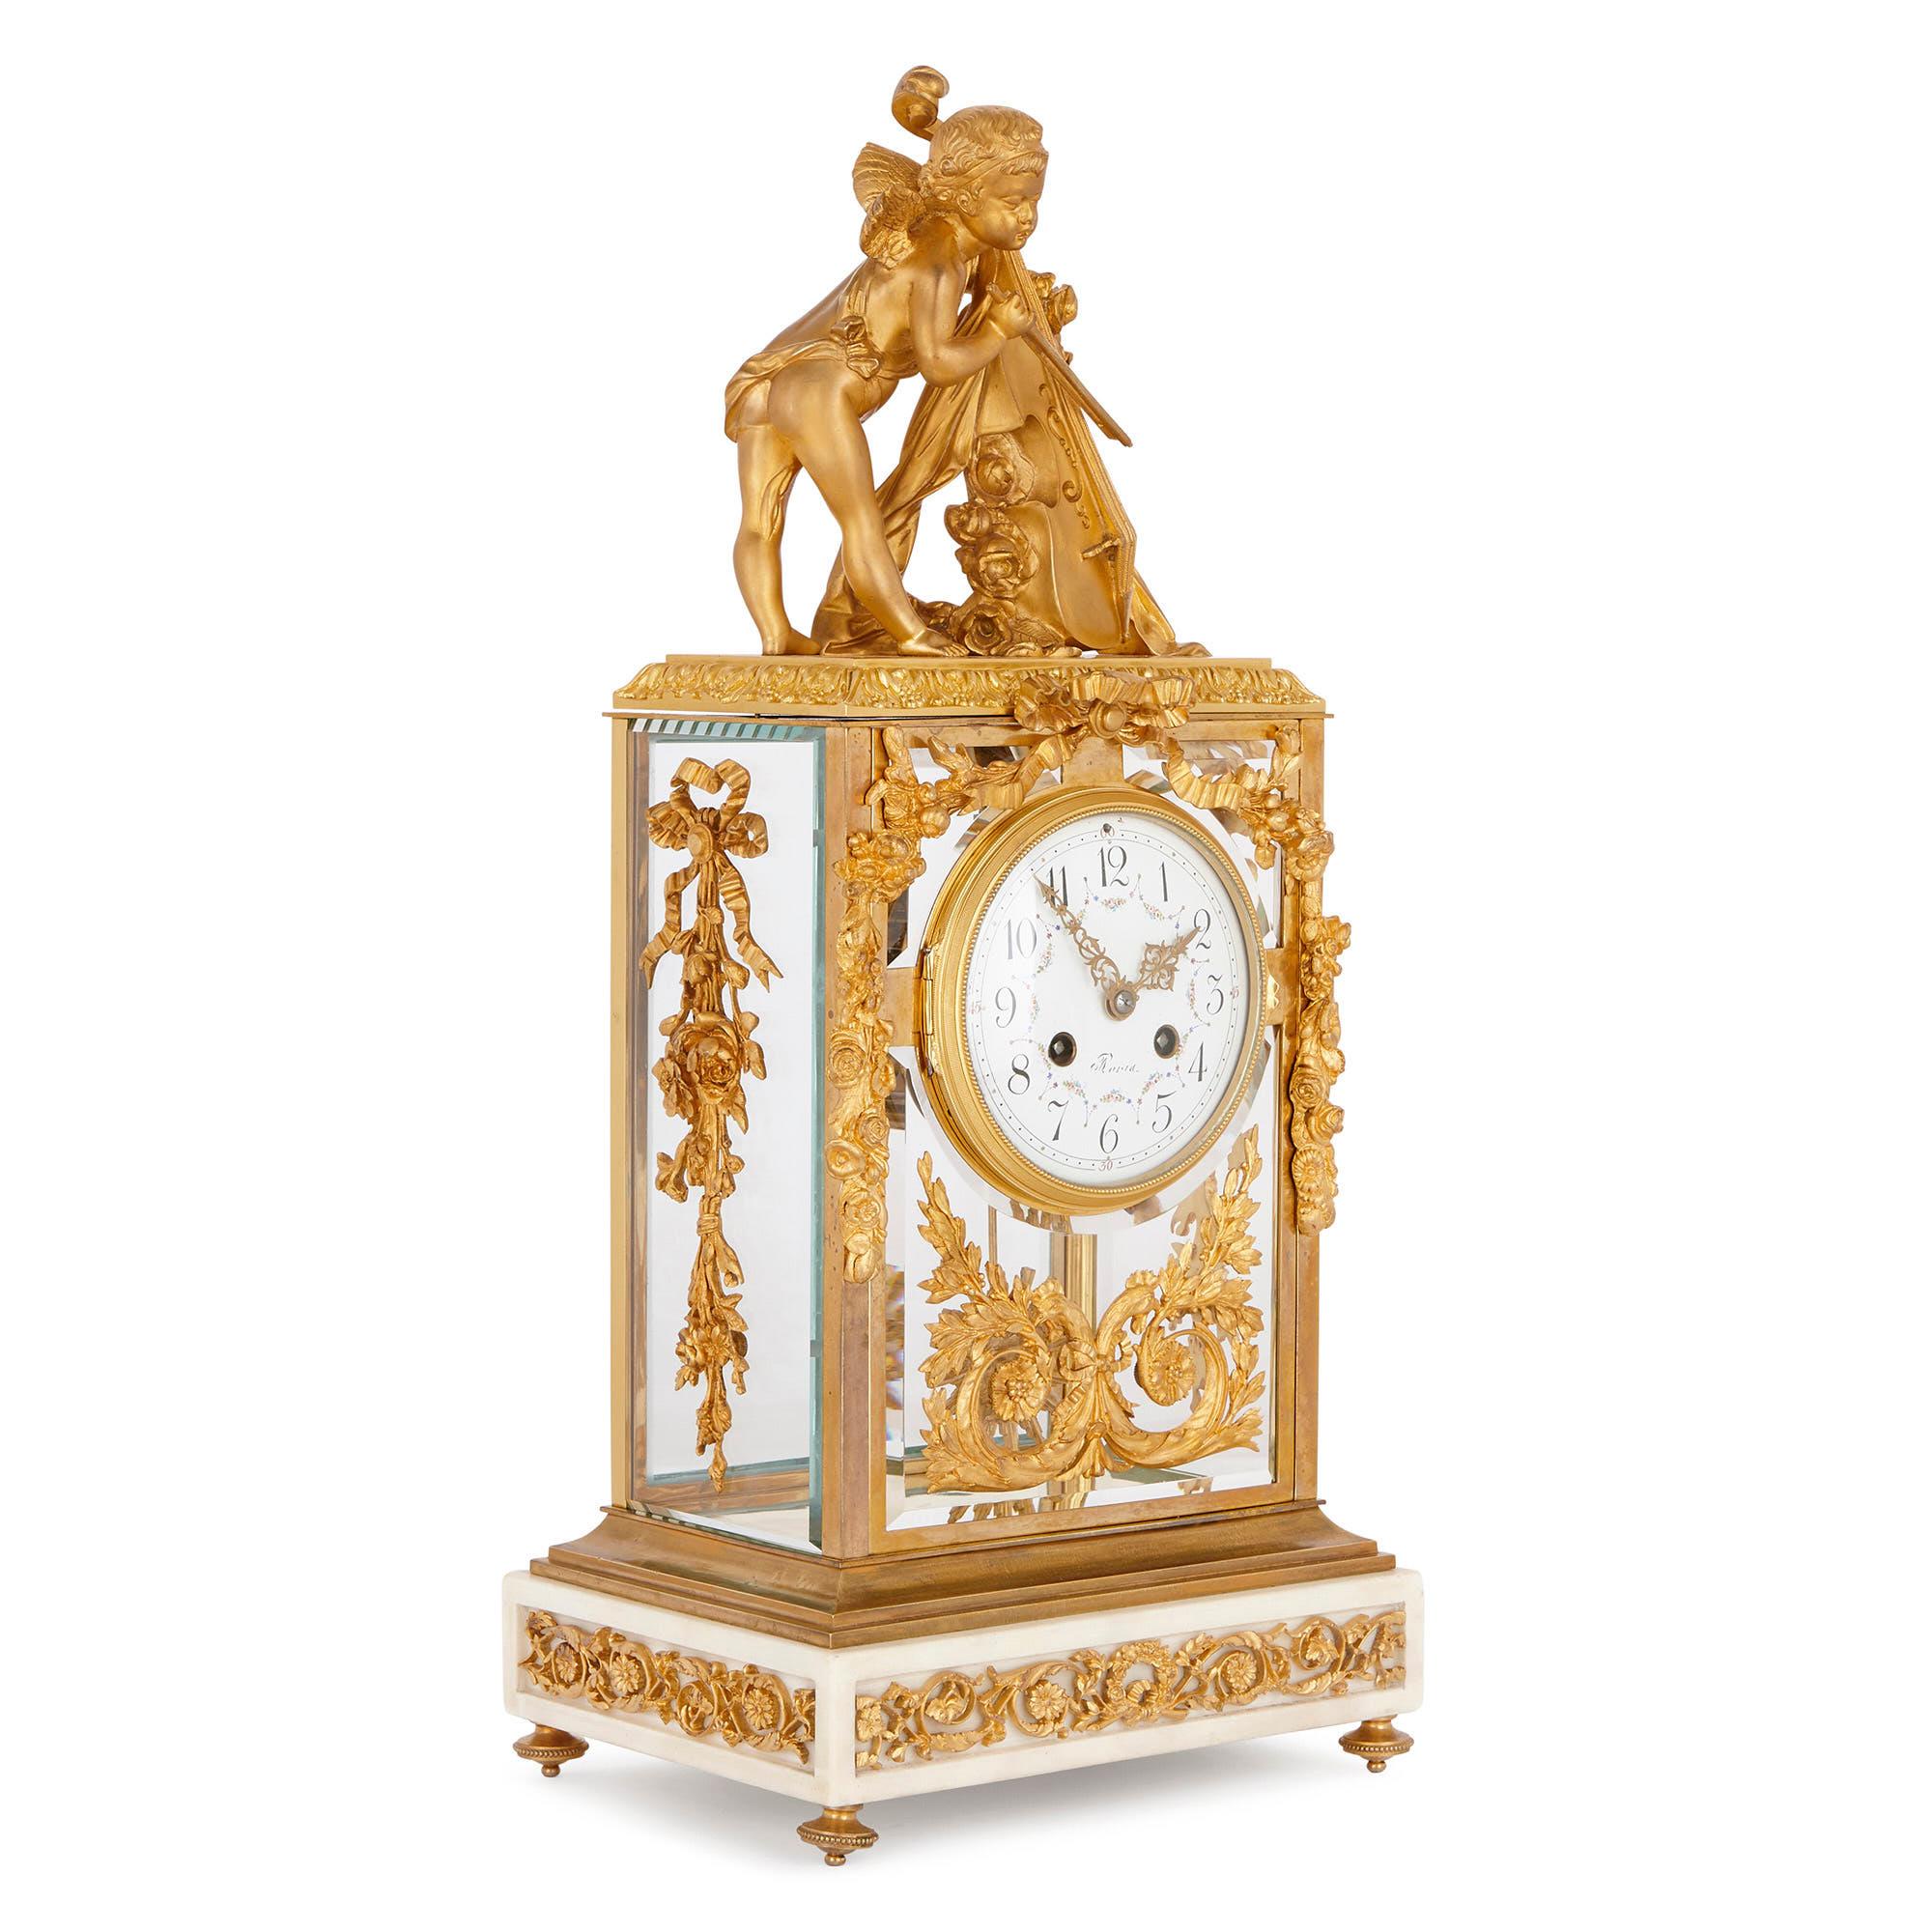 This French mantel clock is designed in an elegant Neoclassical style, after the decorative arts of the Louis XVI period (1754-1793). This clock will look beautiful placed on a mantelpiece, or in some other prominent position in a well-furnished